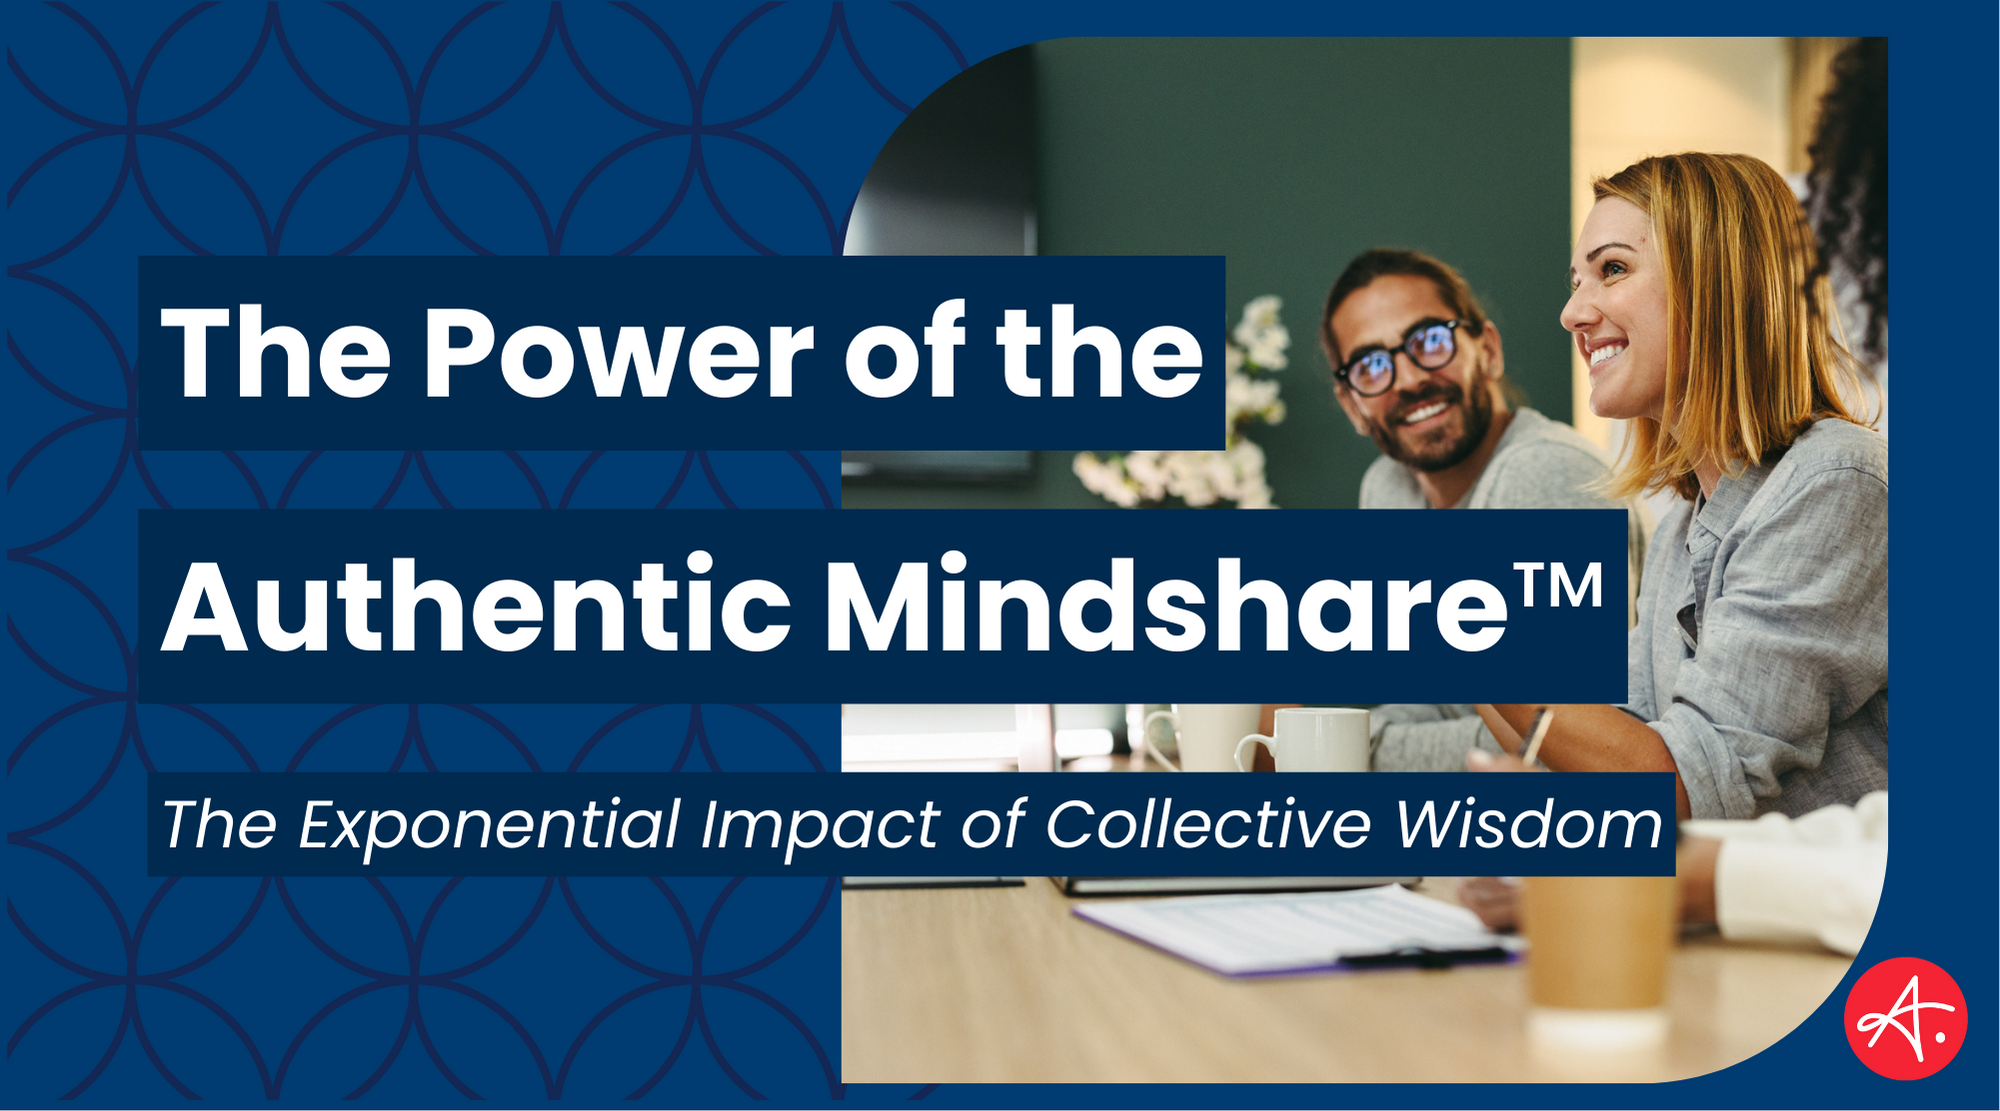 The power of the Authentic Mindshare™ and CMO peer community